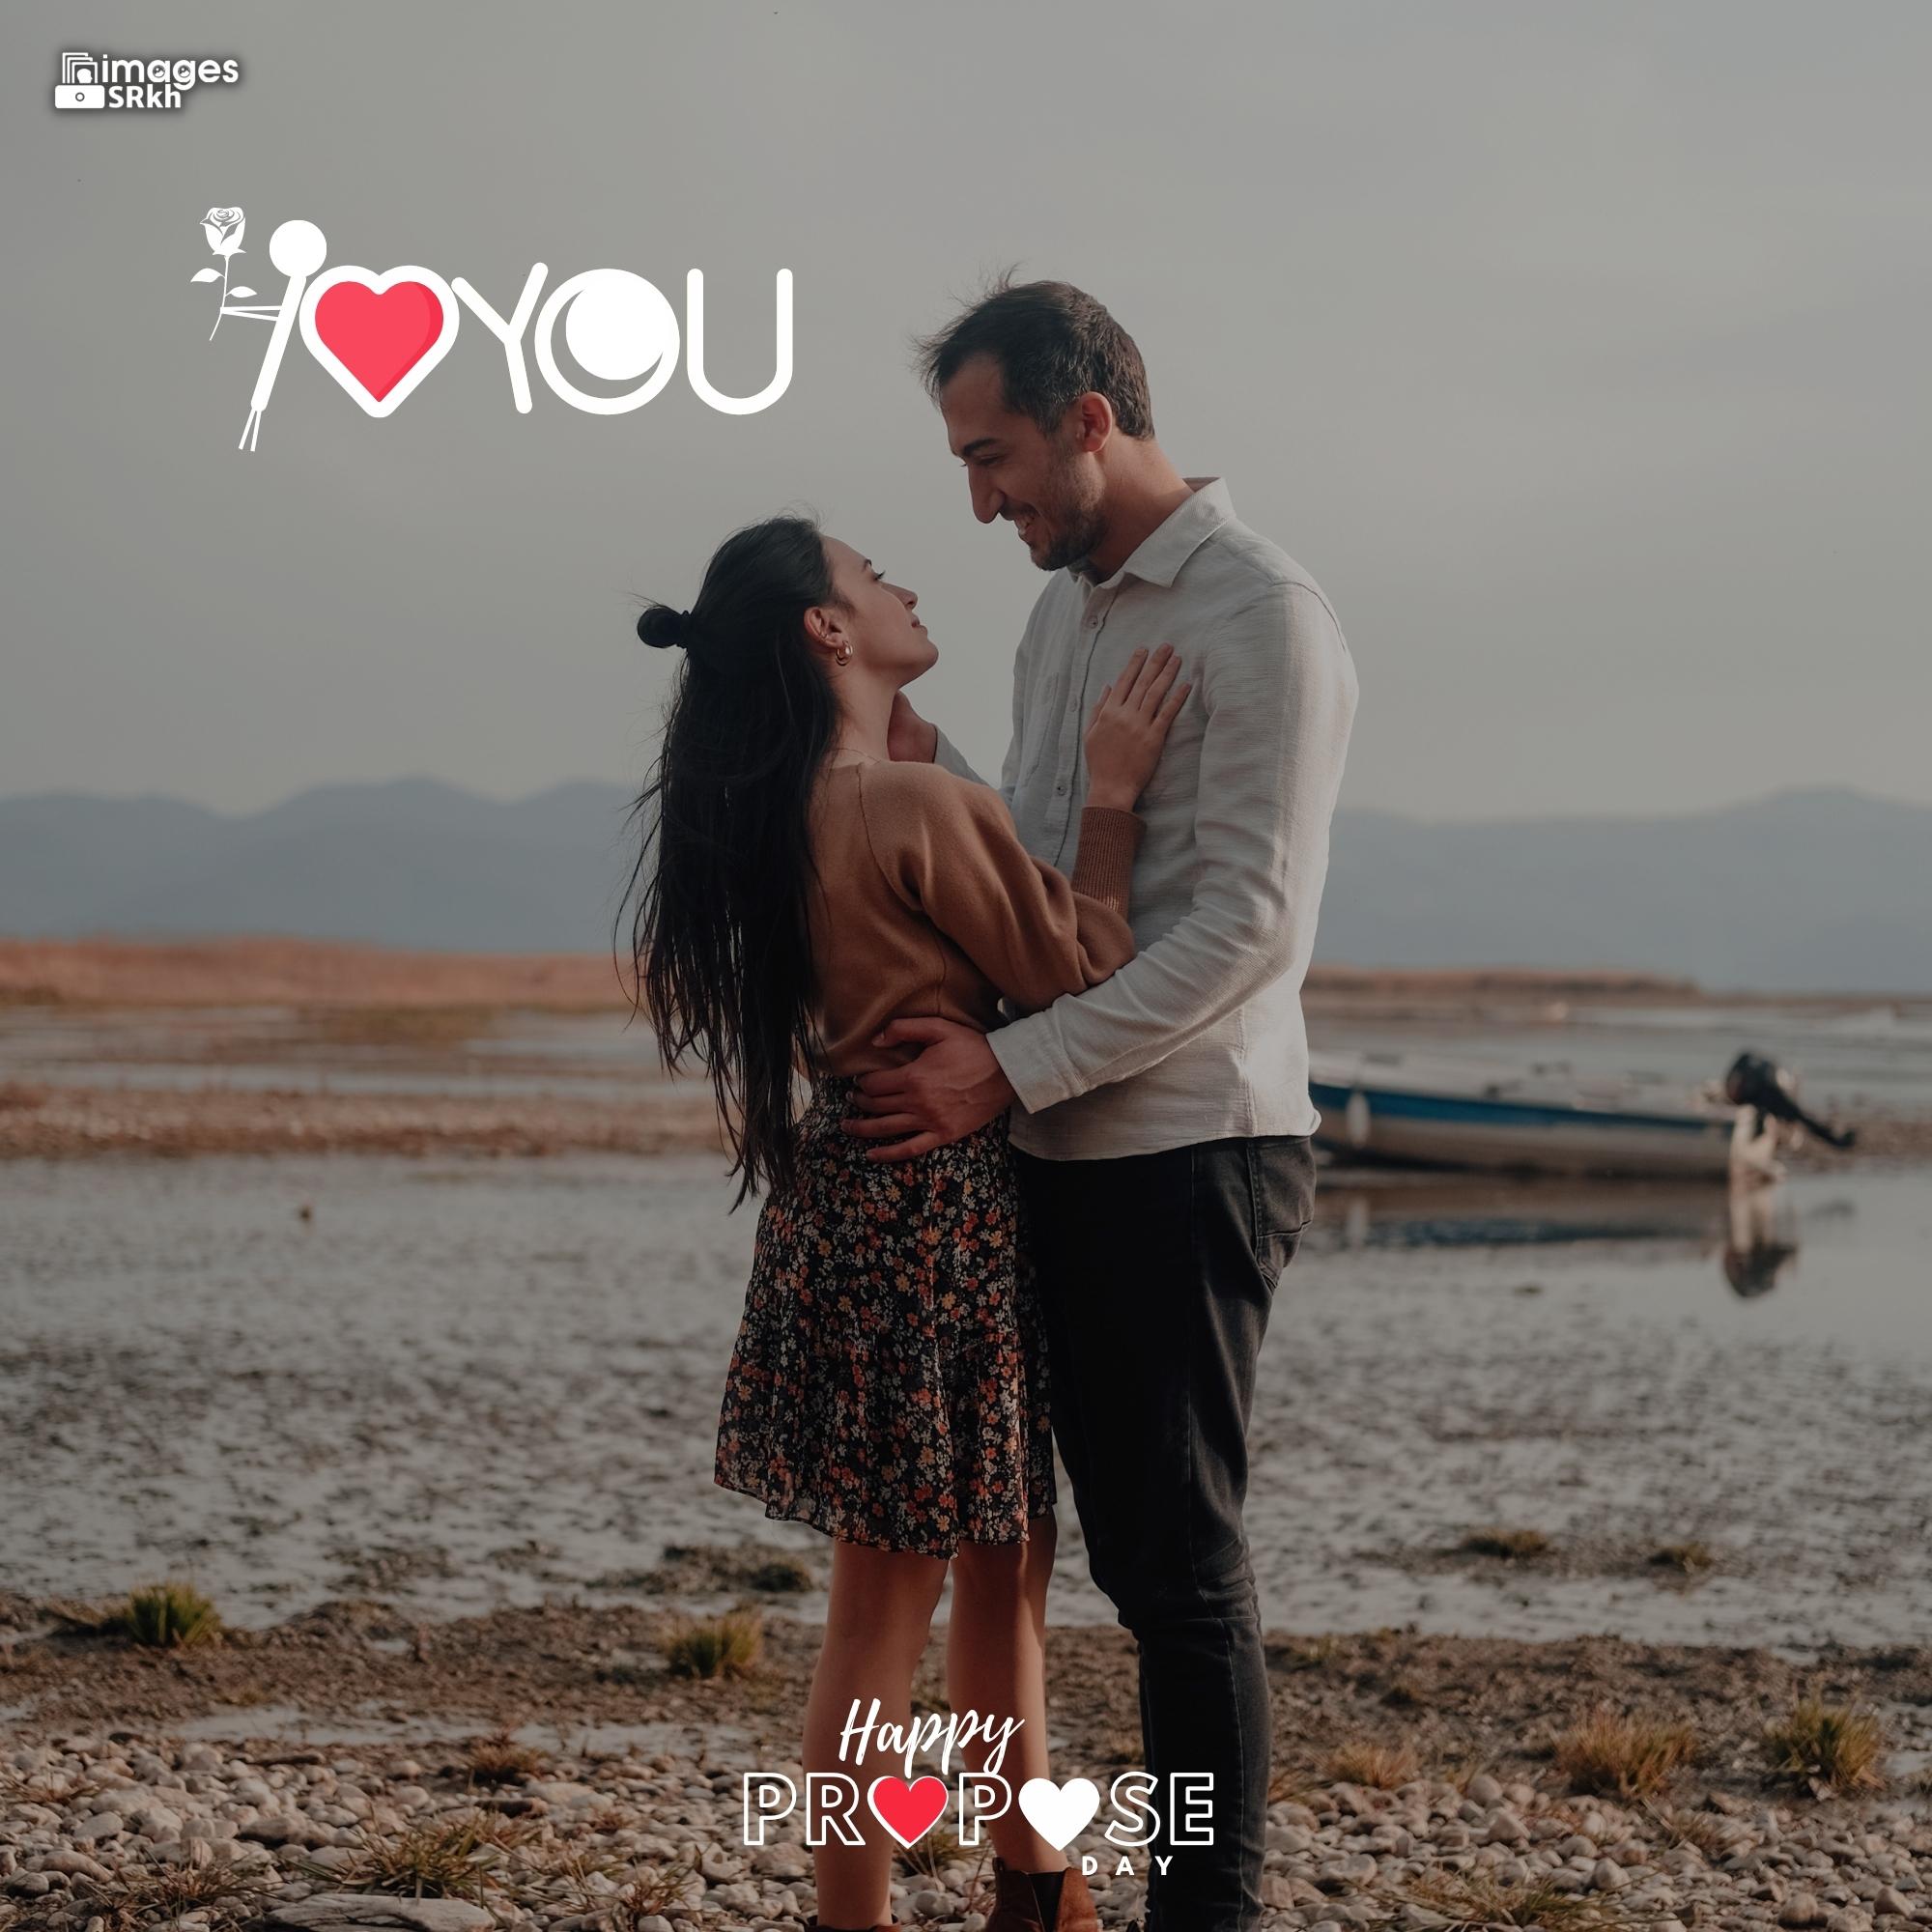 Happy Propose Day Images | 332 | I LOVE YOU